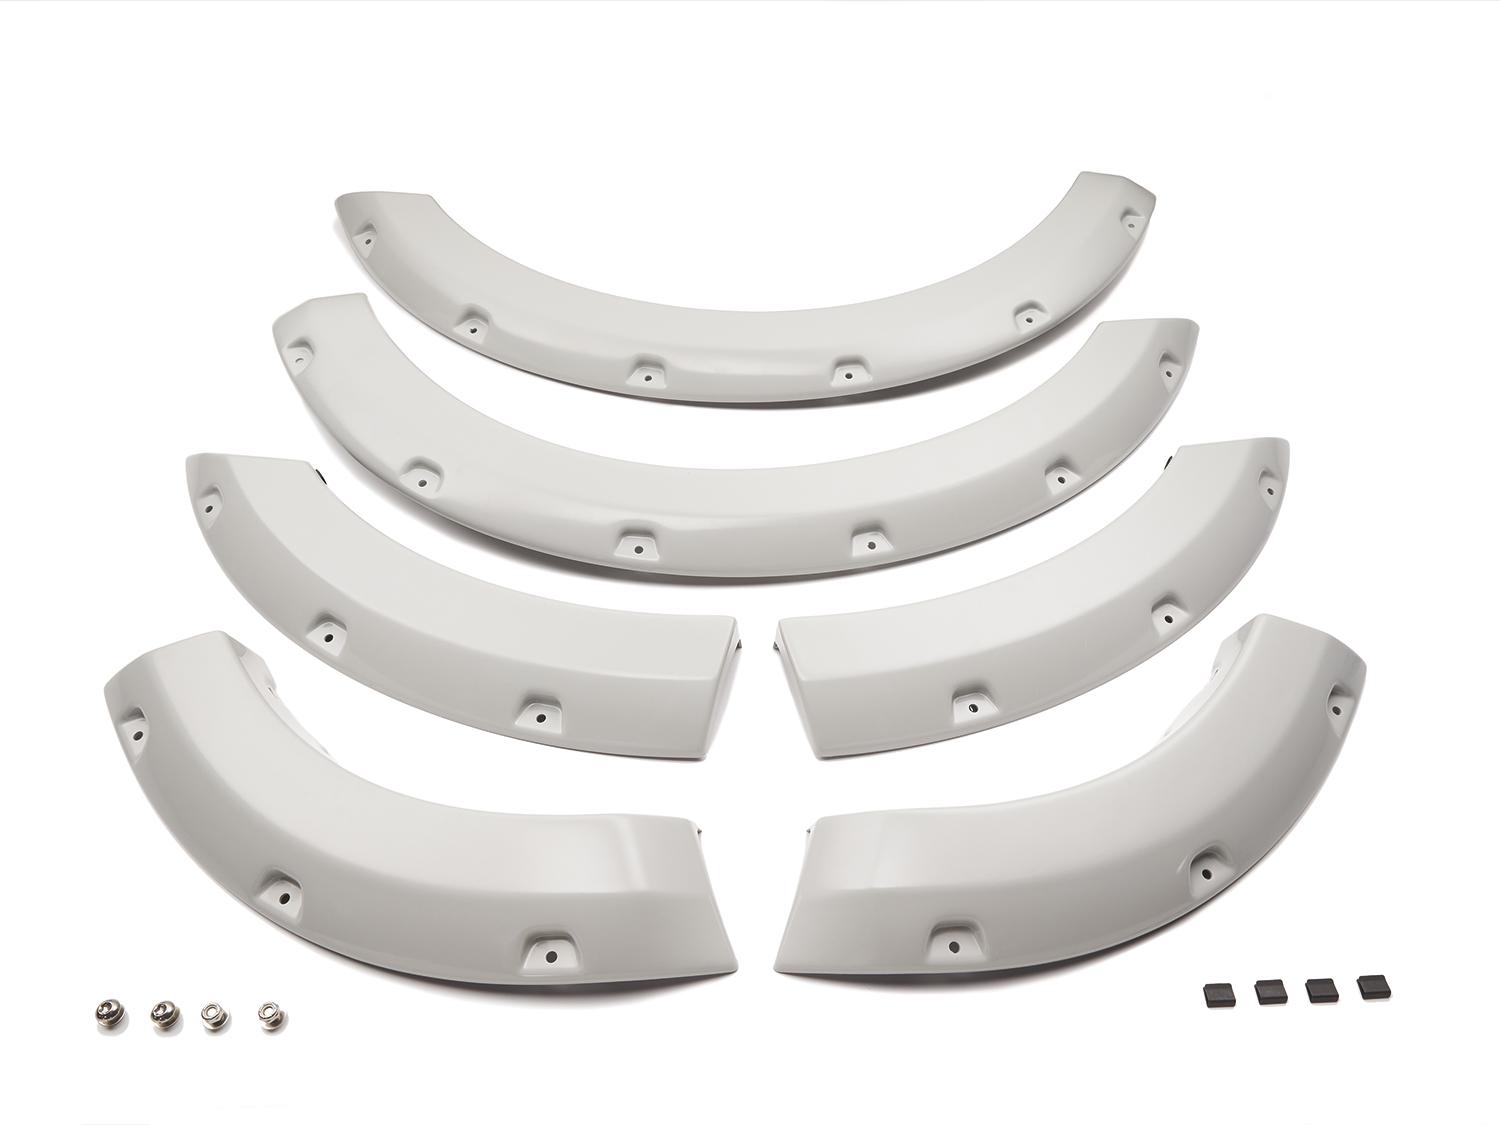 Image for Fender Flares by Bushwacker - 4-Piece Set, Unassembled, Unpainted, Paintable from AccessoriesCanada